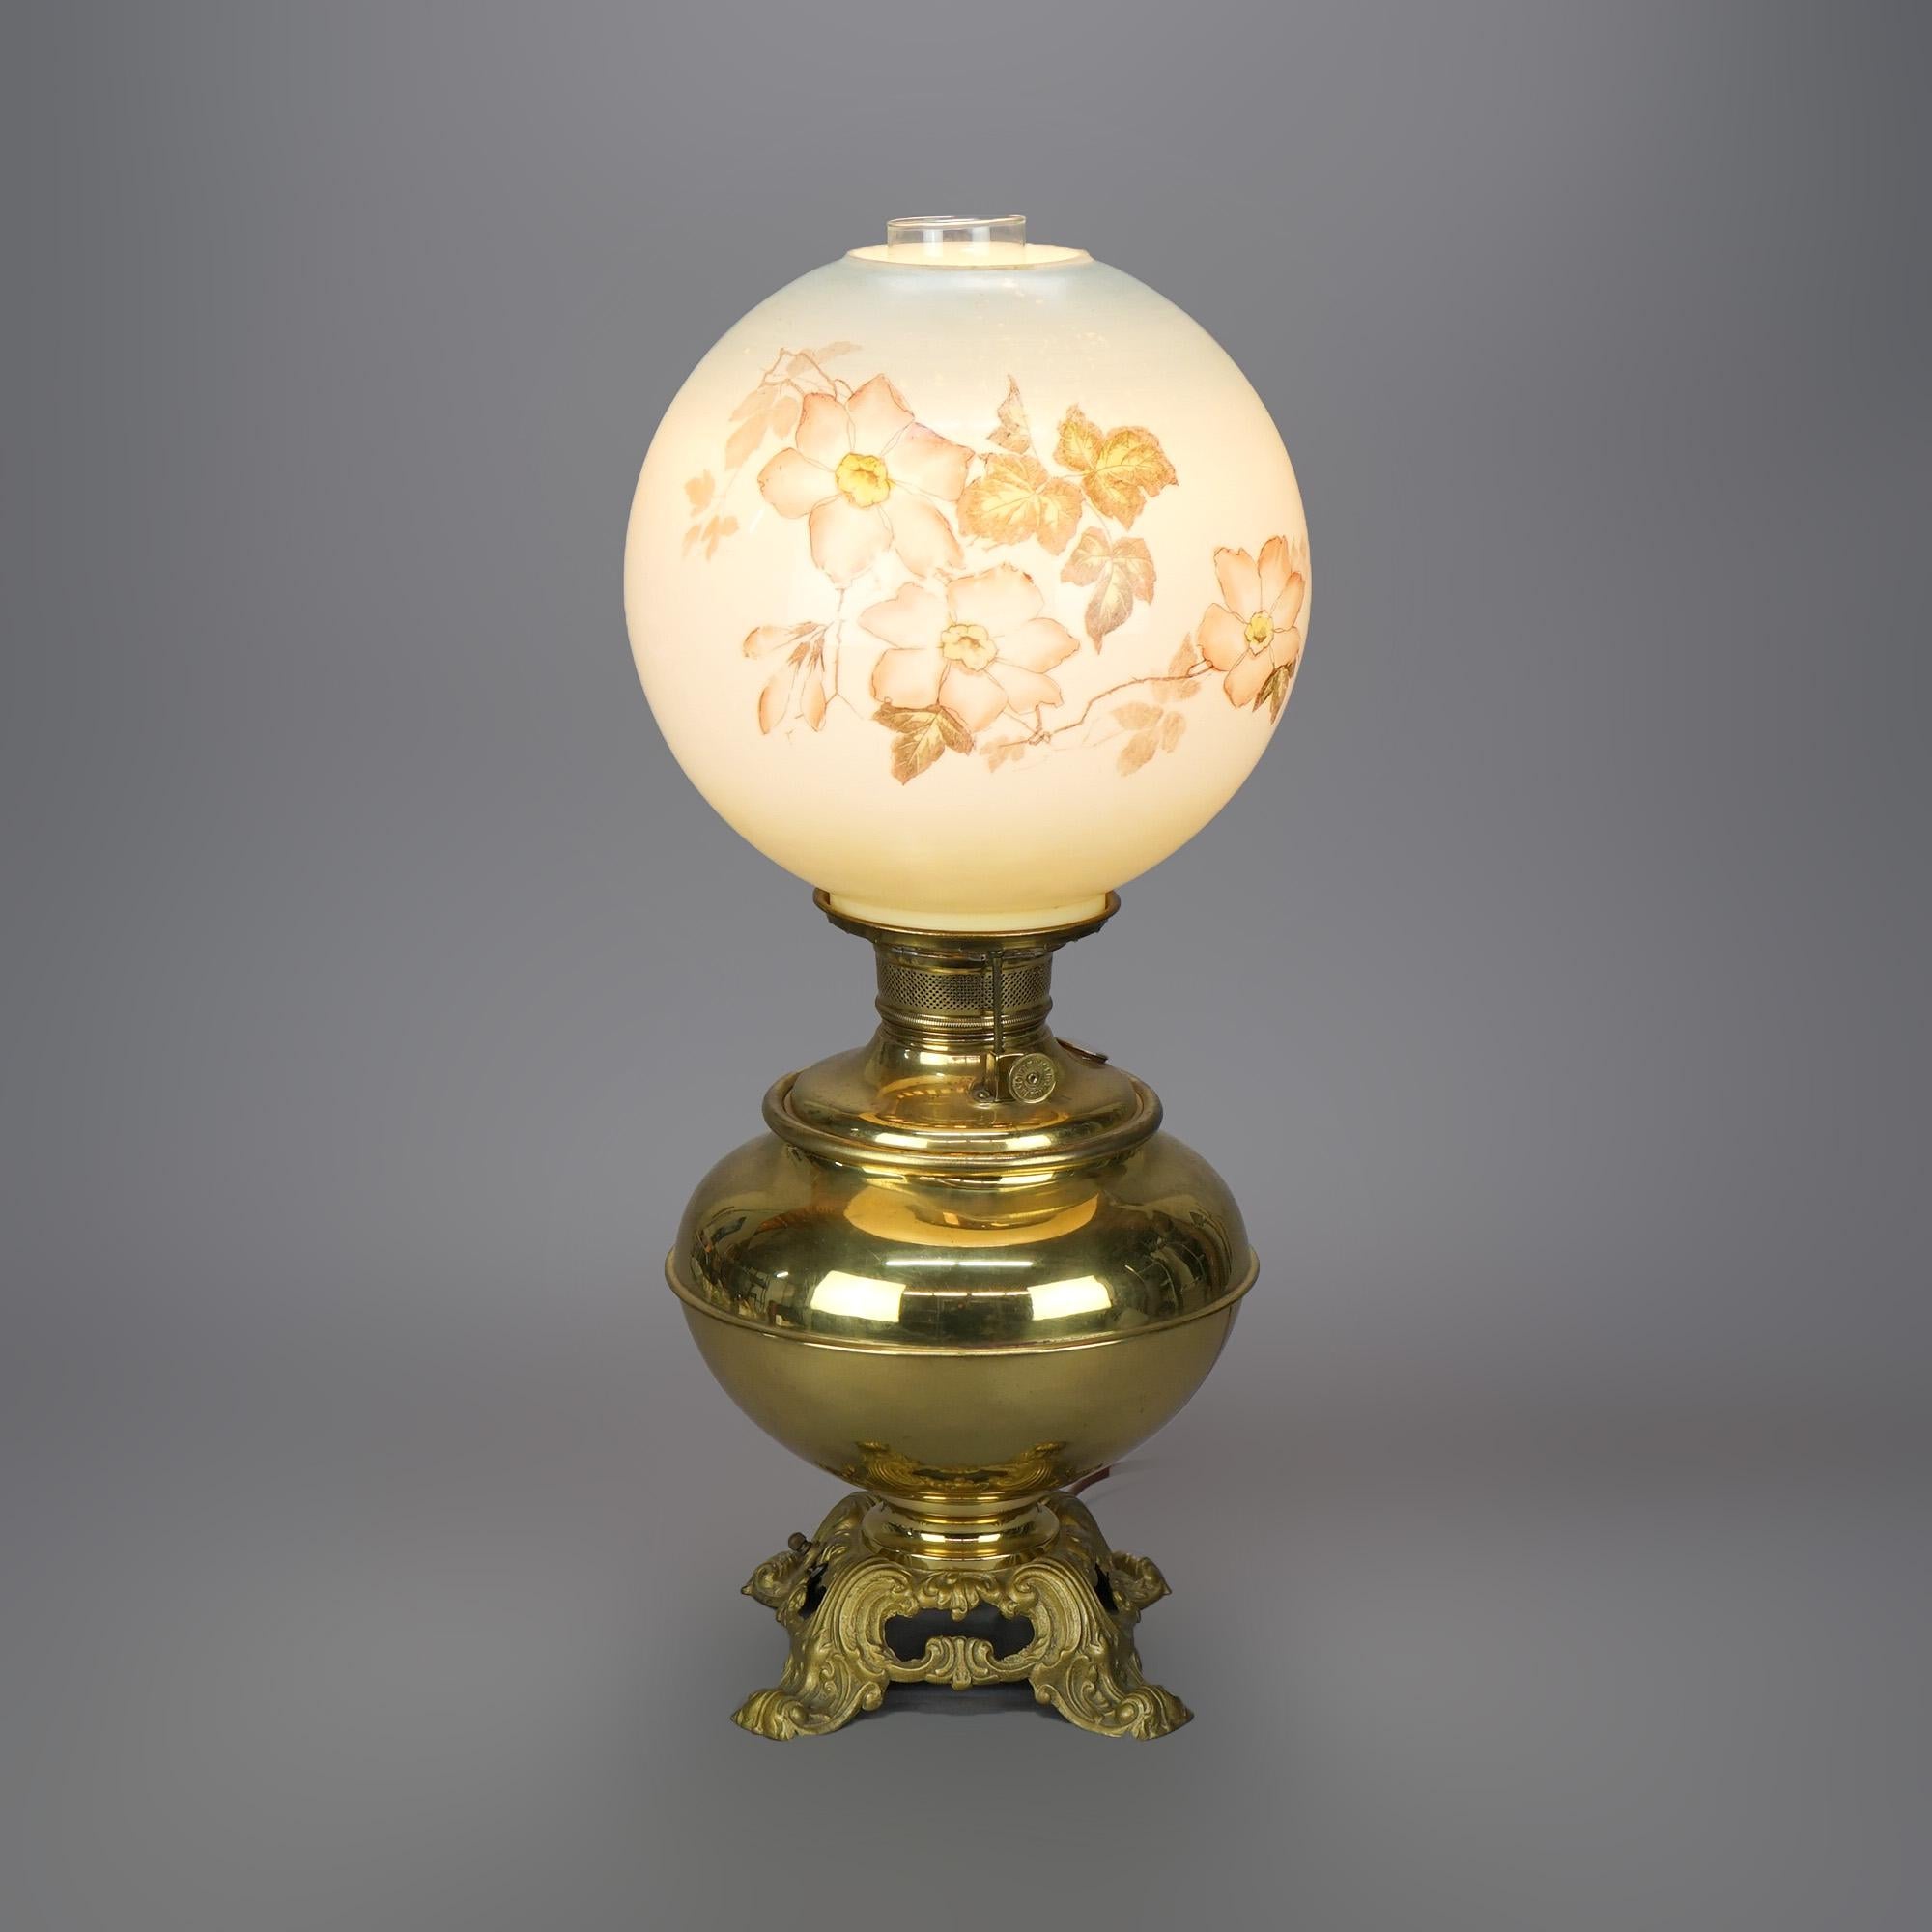 An antique Victorian gone with the wind table lamp offers painted glass globe with floral design over brass font raised on base with scroll form feet, electrified, circa 1890

Measures- 22.25''H x 9.5''W x 9.5''D.